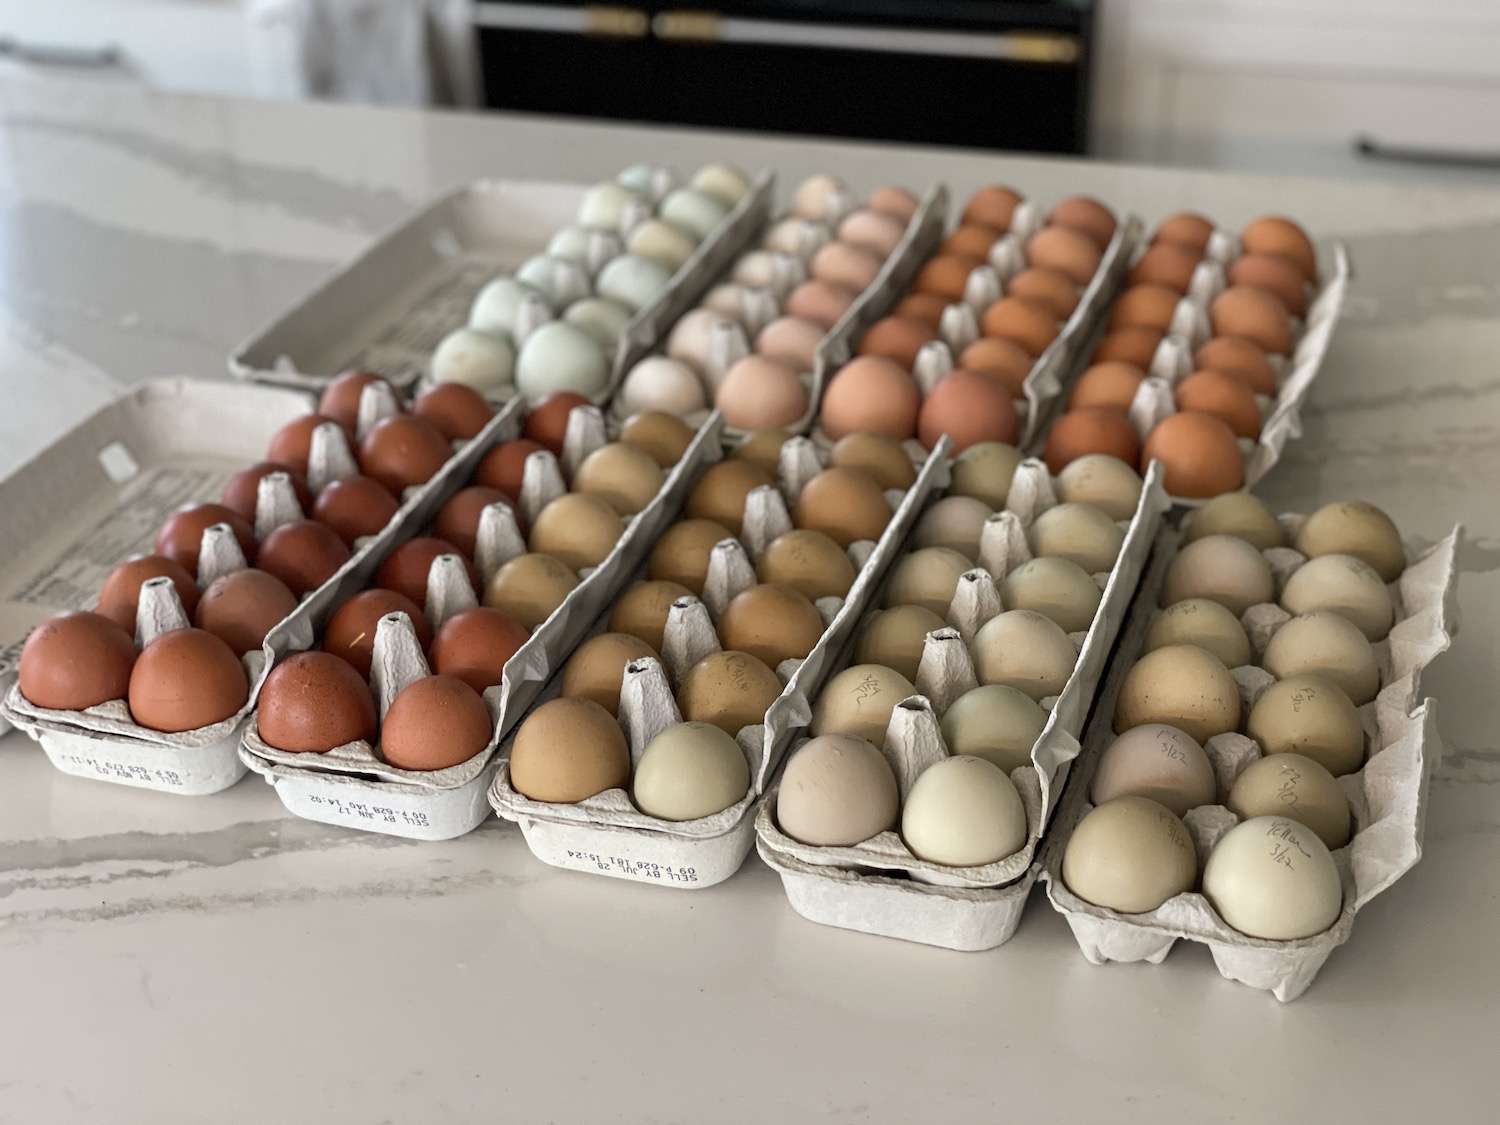 Fertilized eggs of many different colors sitting out and ready to go into the incubator